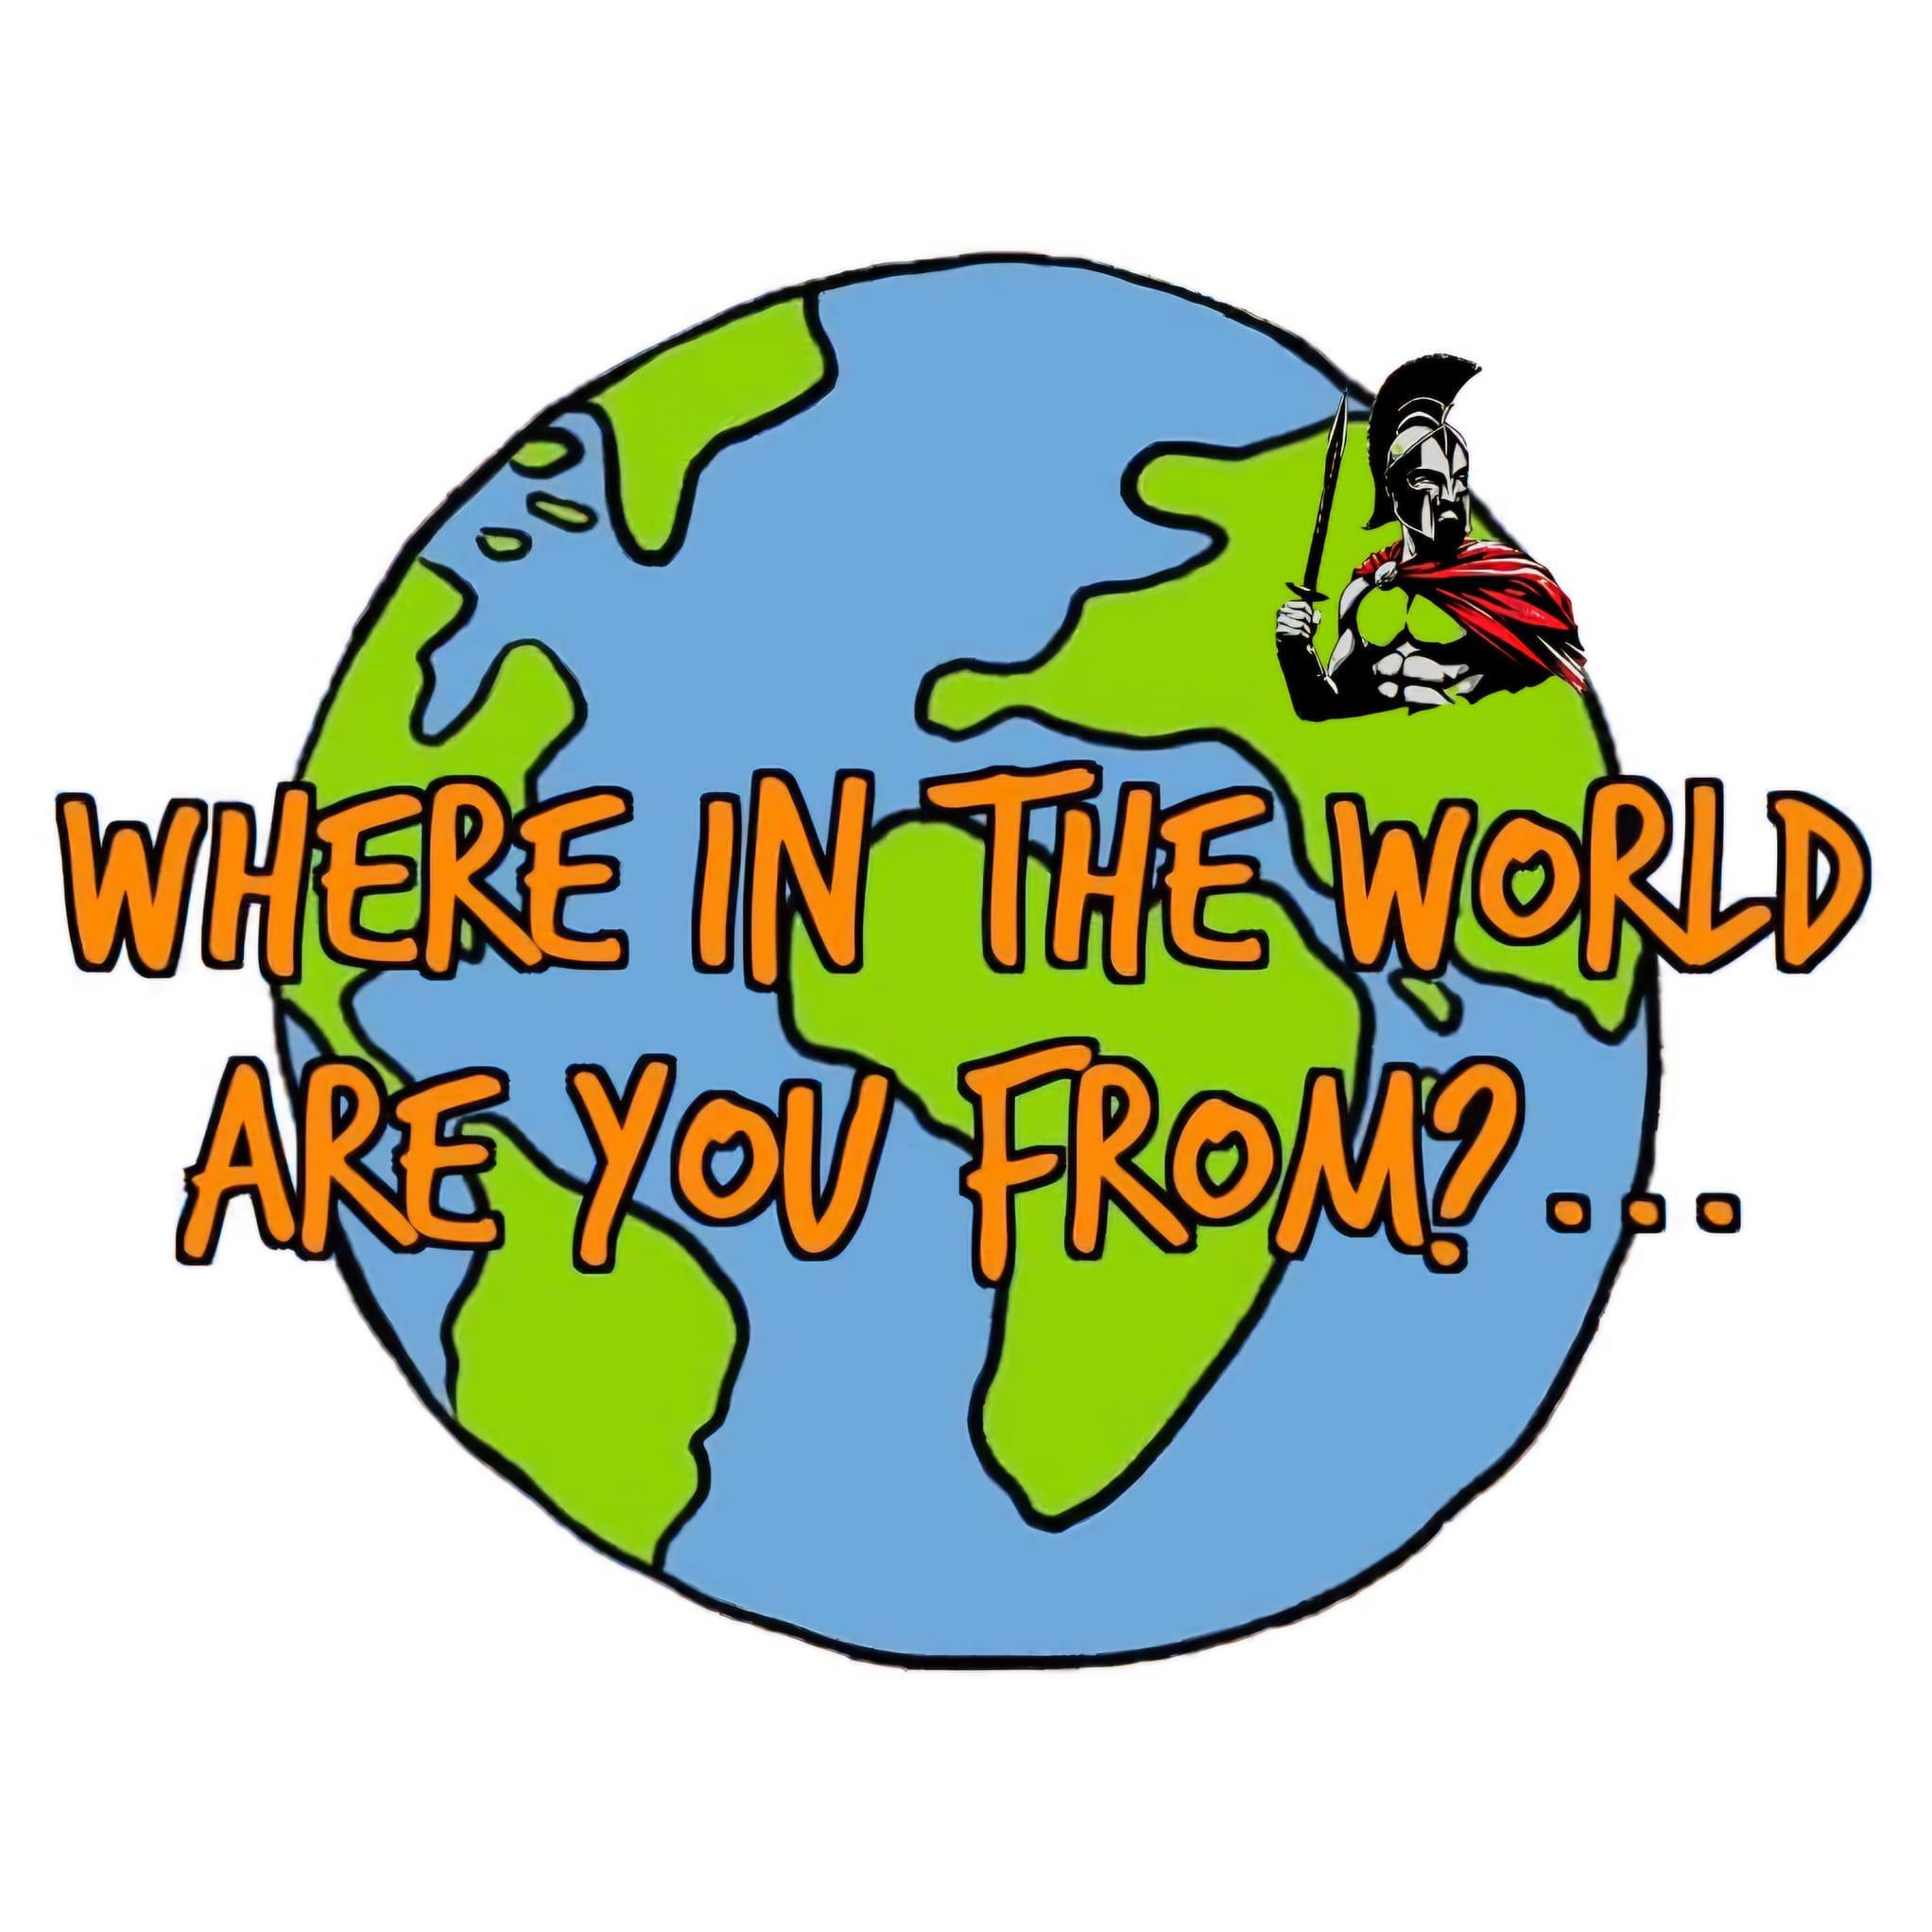 Where Are You From?